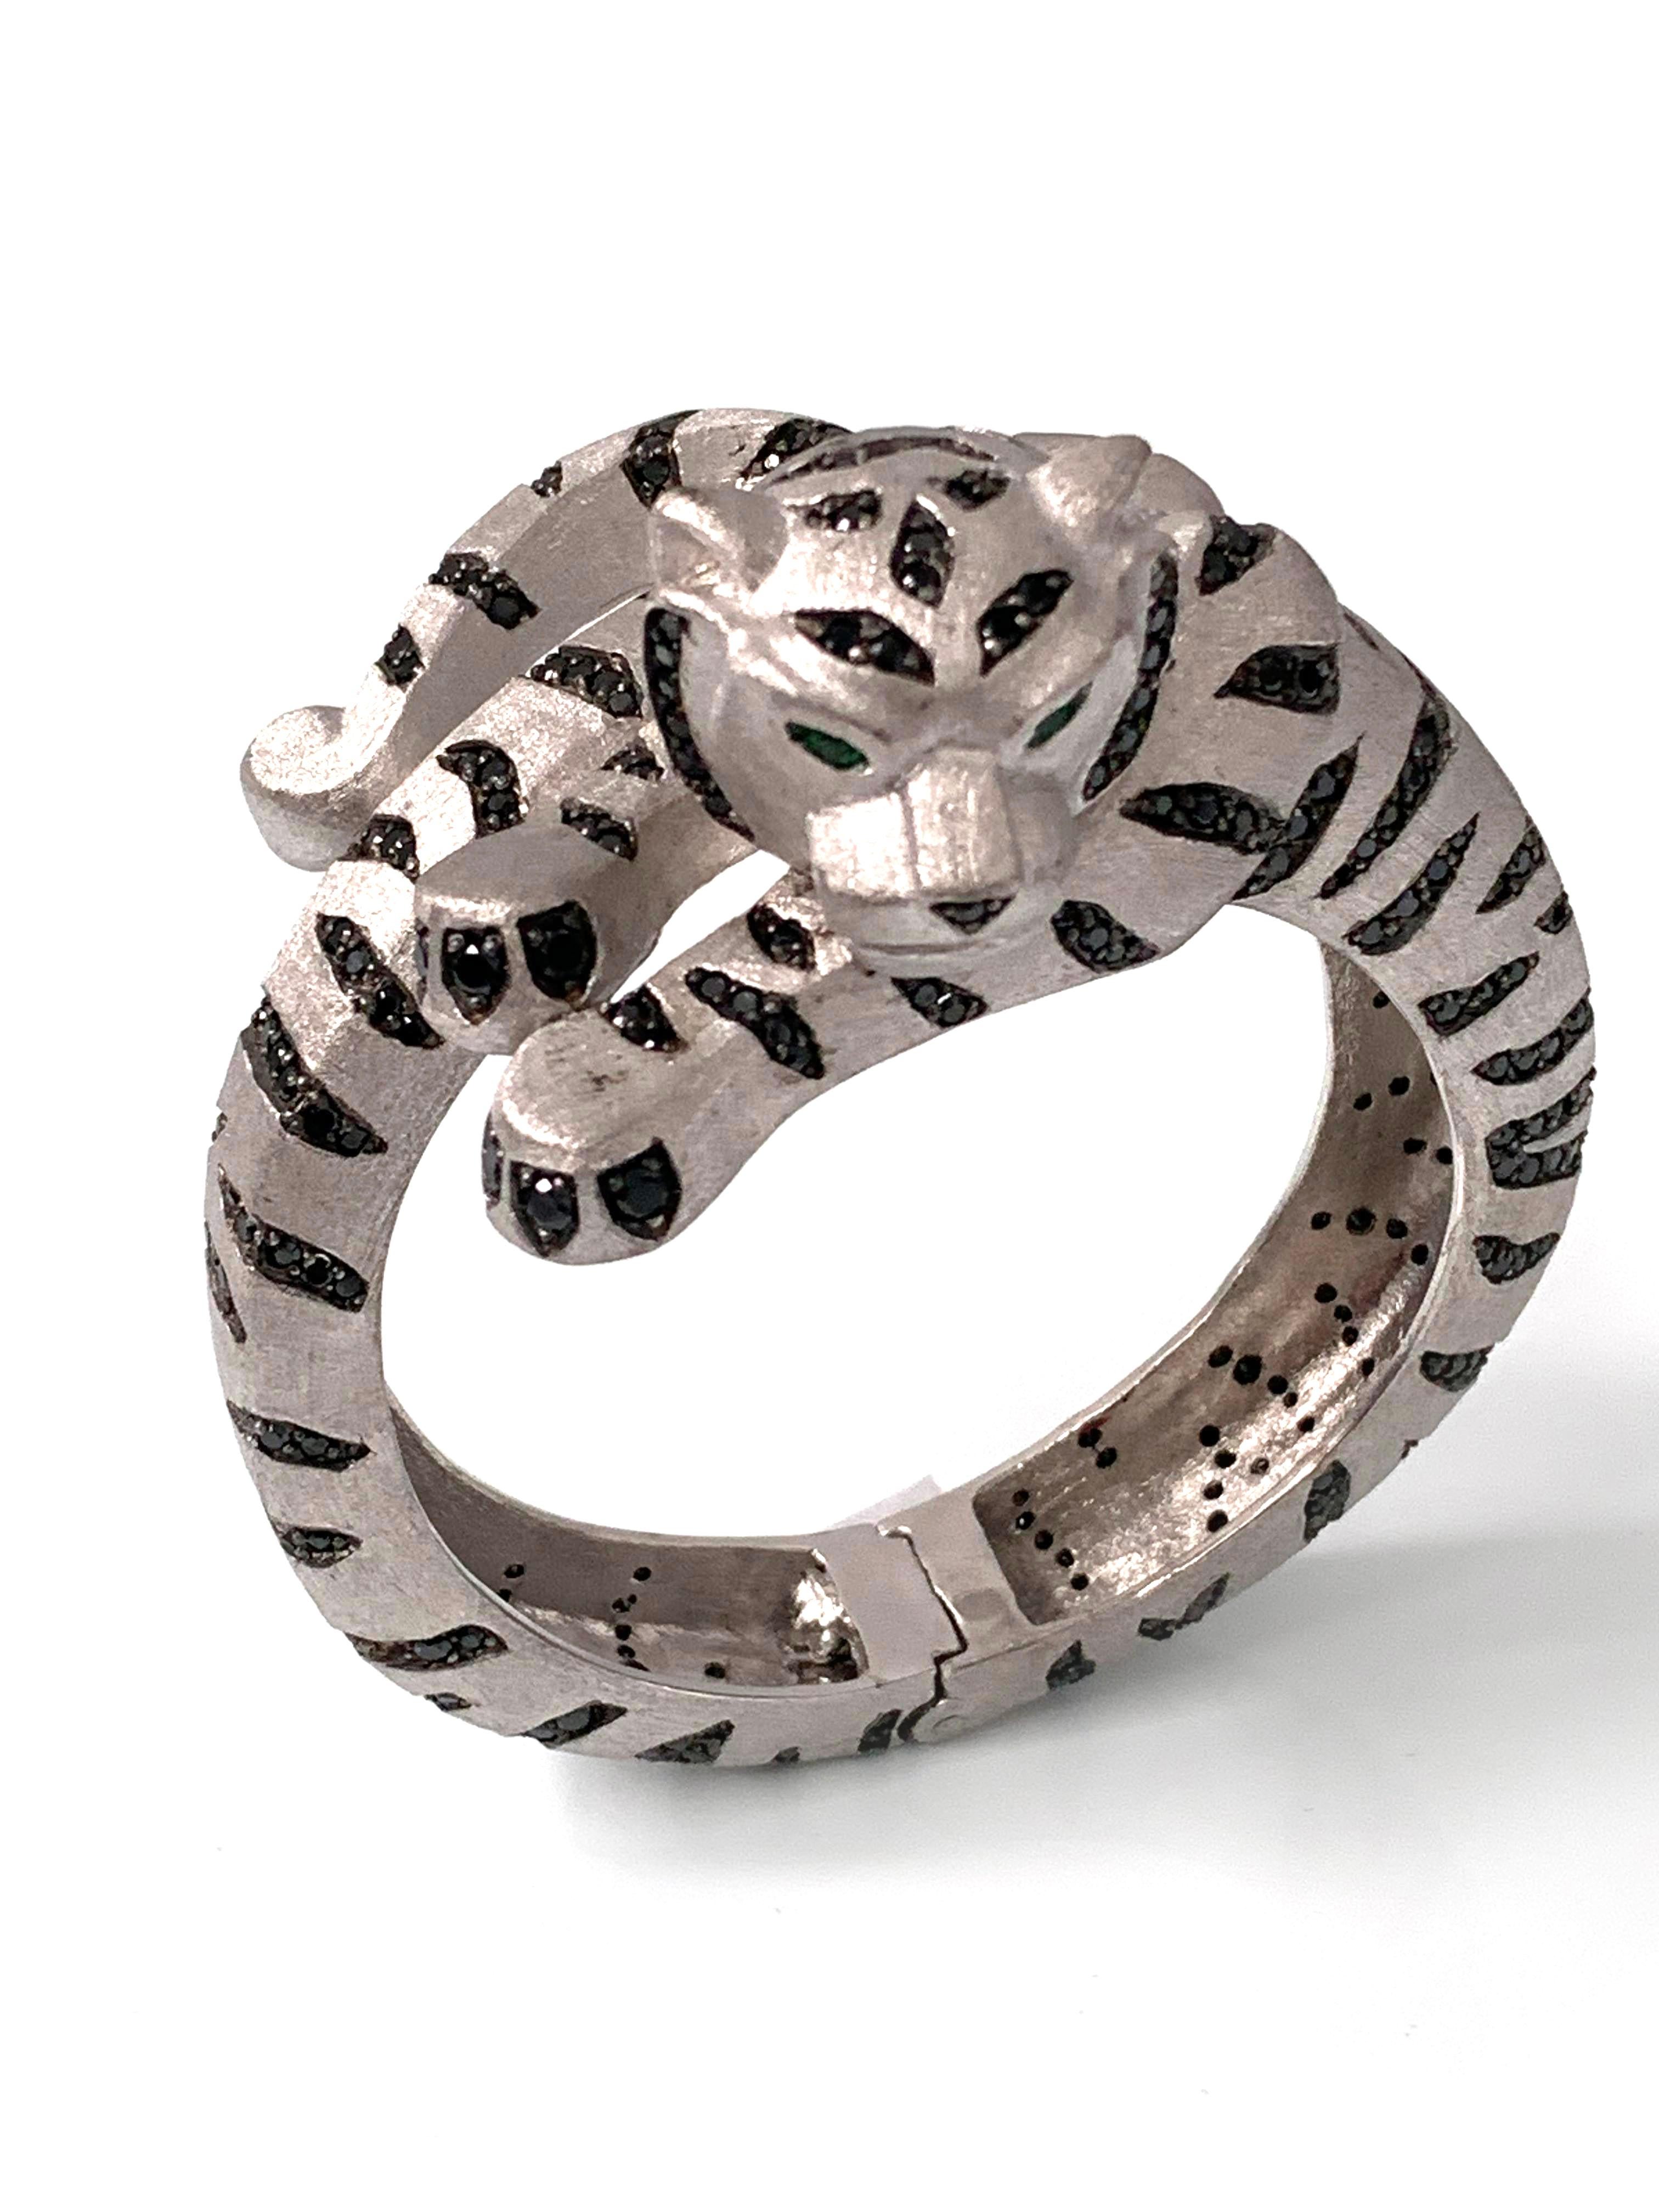 Unique and fabulous White Bengal Tiger Bangle Bracelet decorated with 400 pcs of round black onyx and emerald eyes. Handset work, with platinum and black rhodium plated. Super strong magnetic lock. 

Fits 7